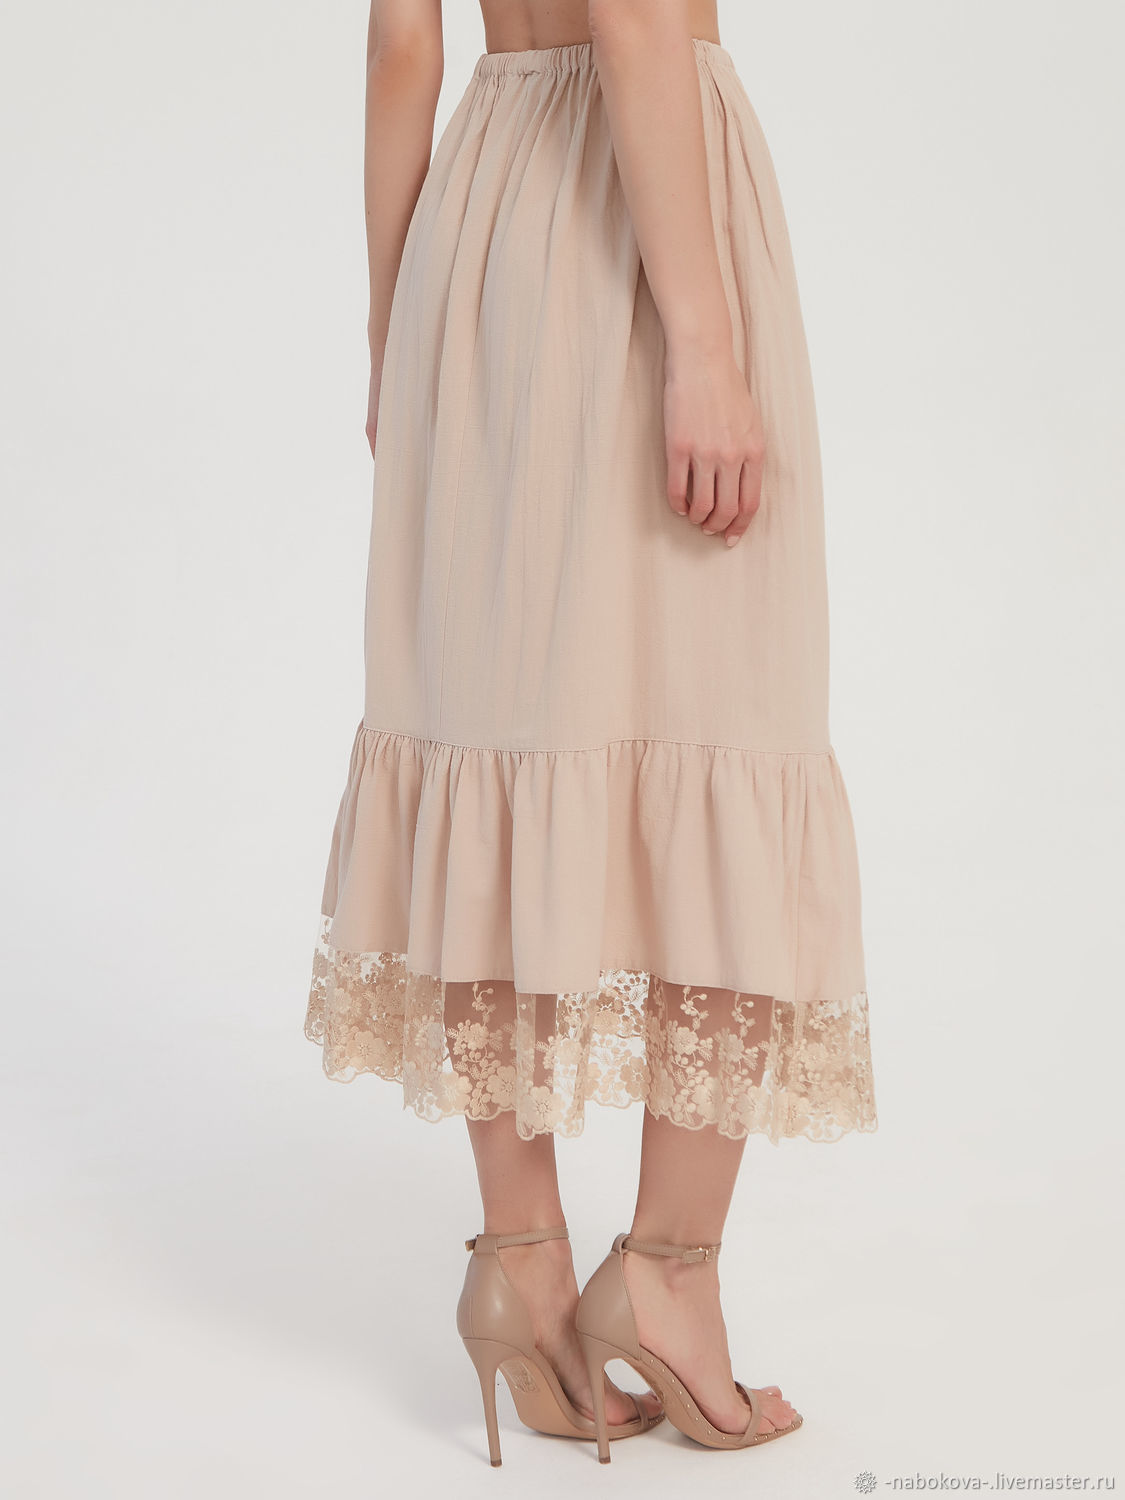 Lower skirt with lace in beige color, Skirts, Moscow,  Фото №1